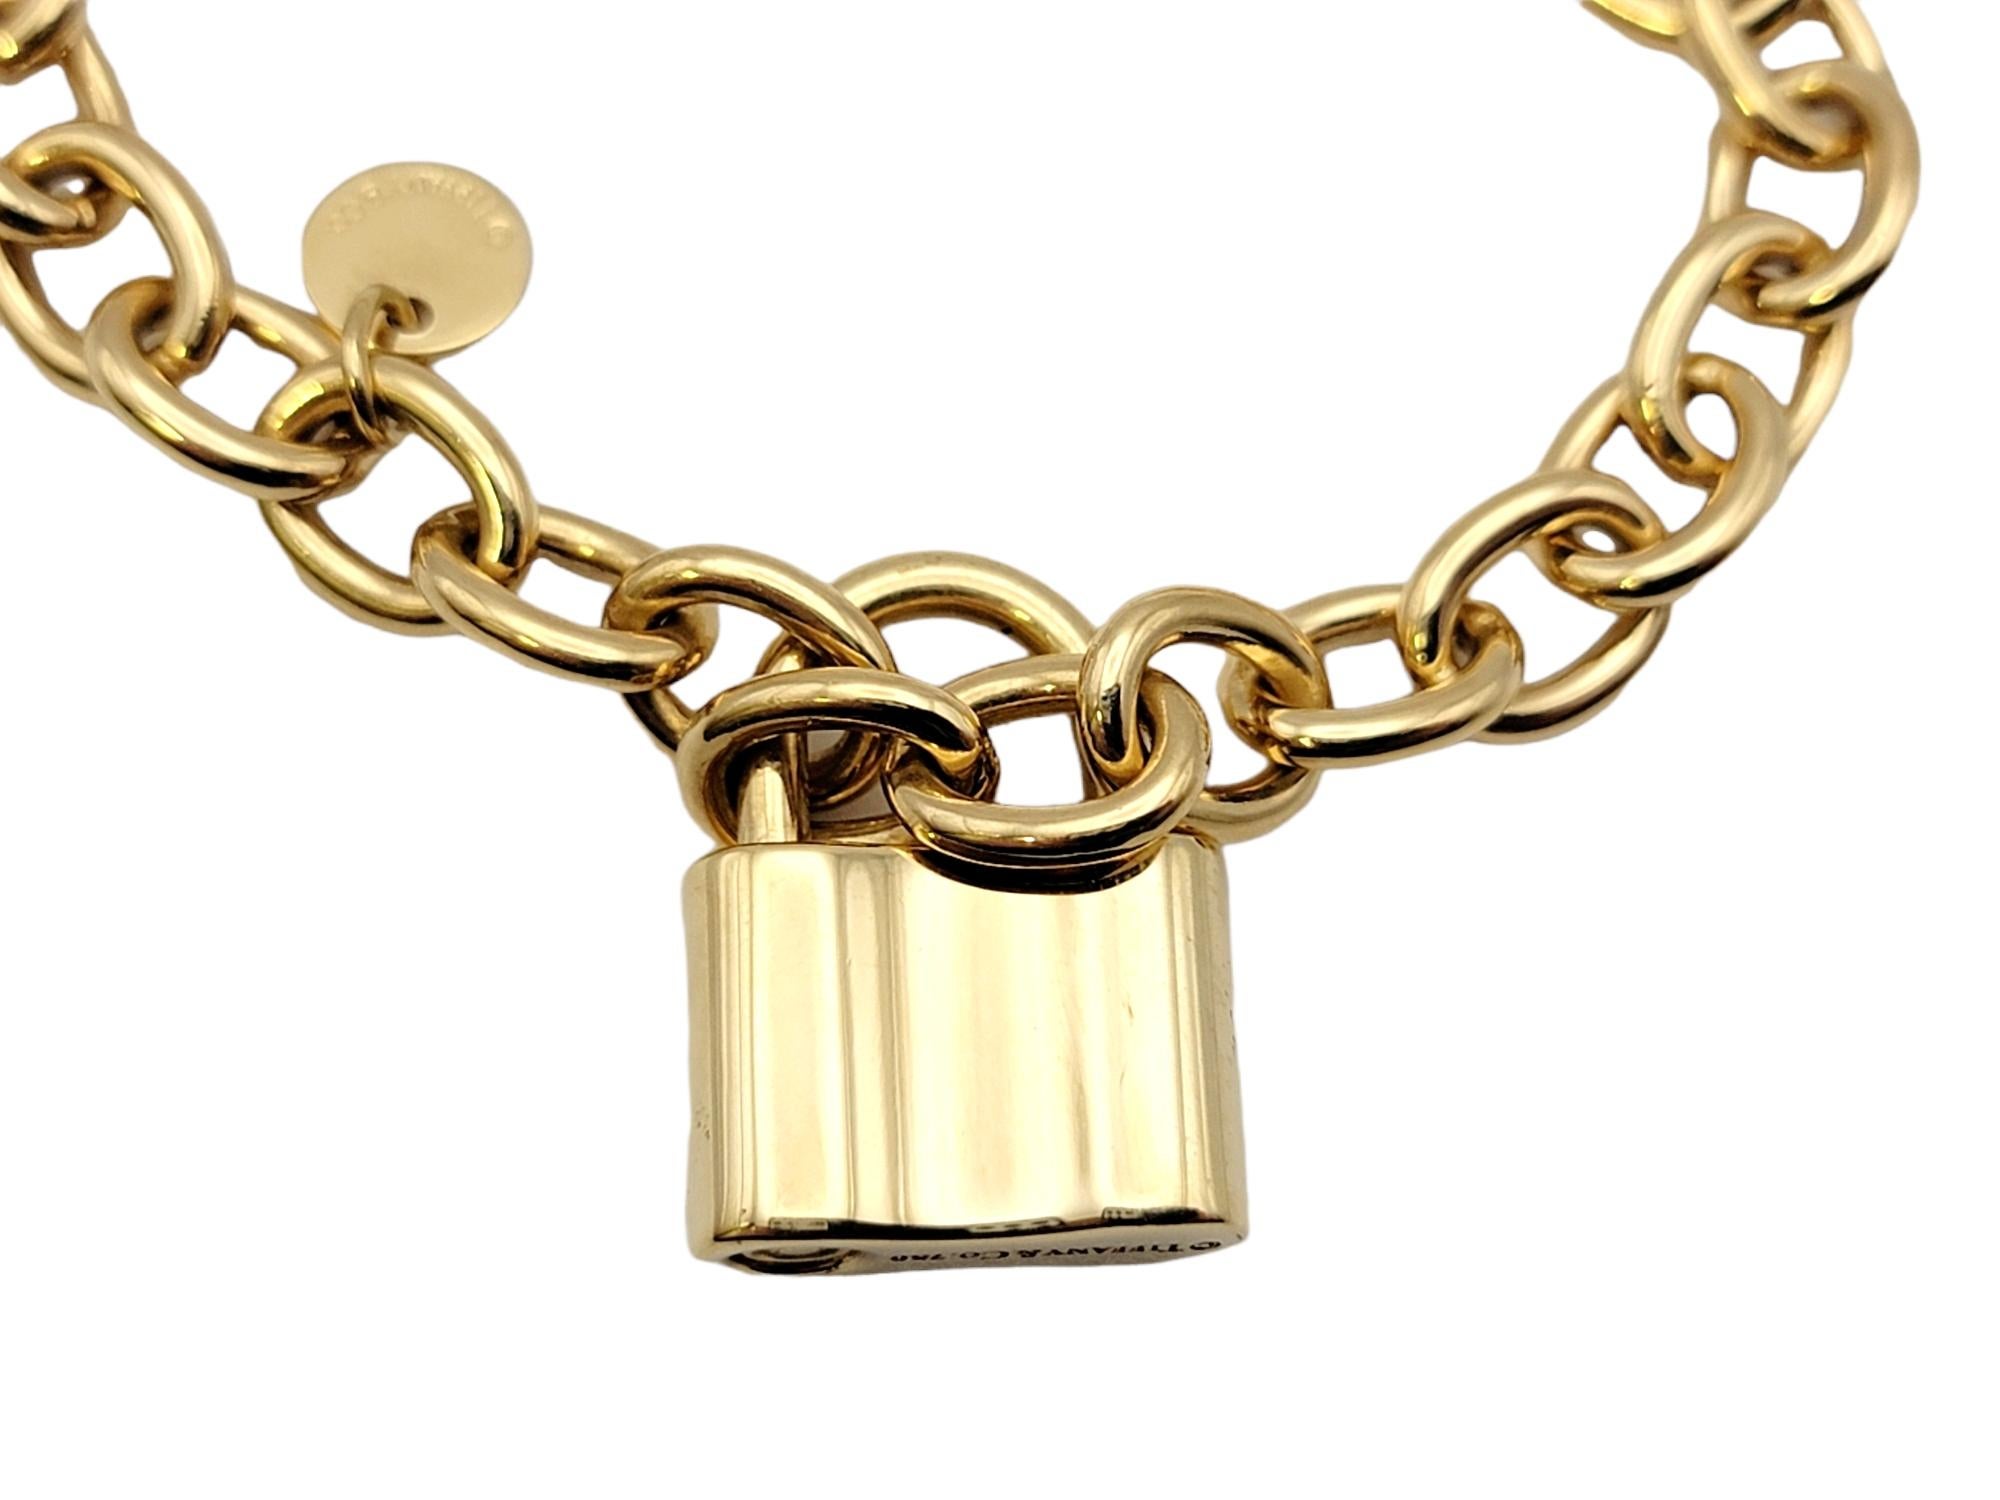 Contemporary Tiffany & Co. 1837 Lock Circle Chain Link Bracelet in 18 Karat Yellow Gold